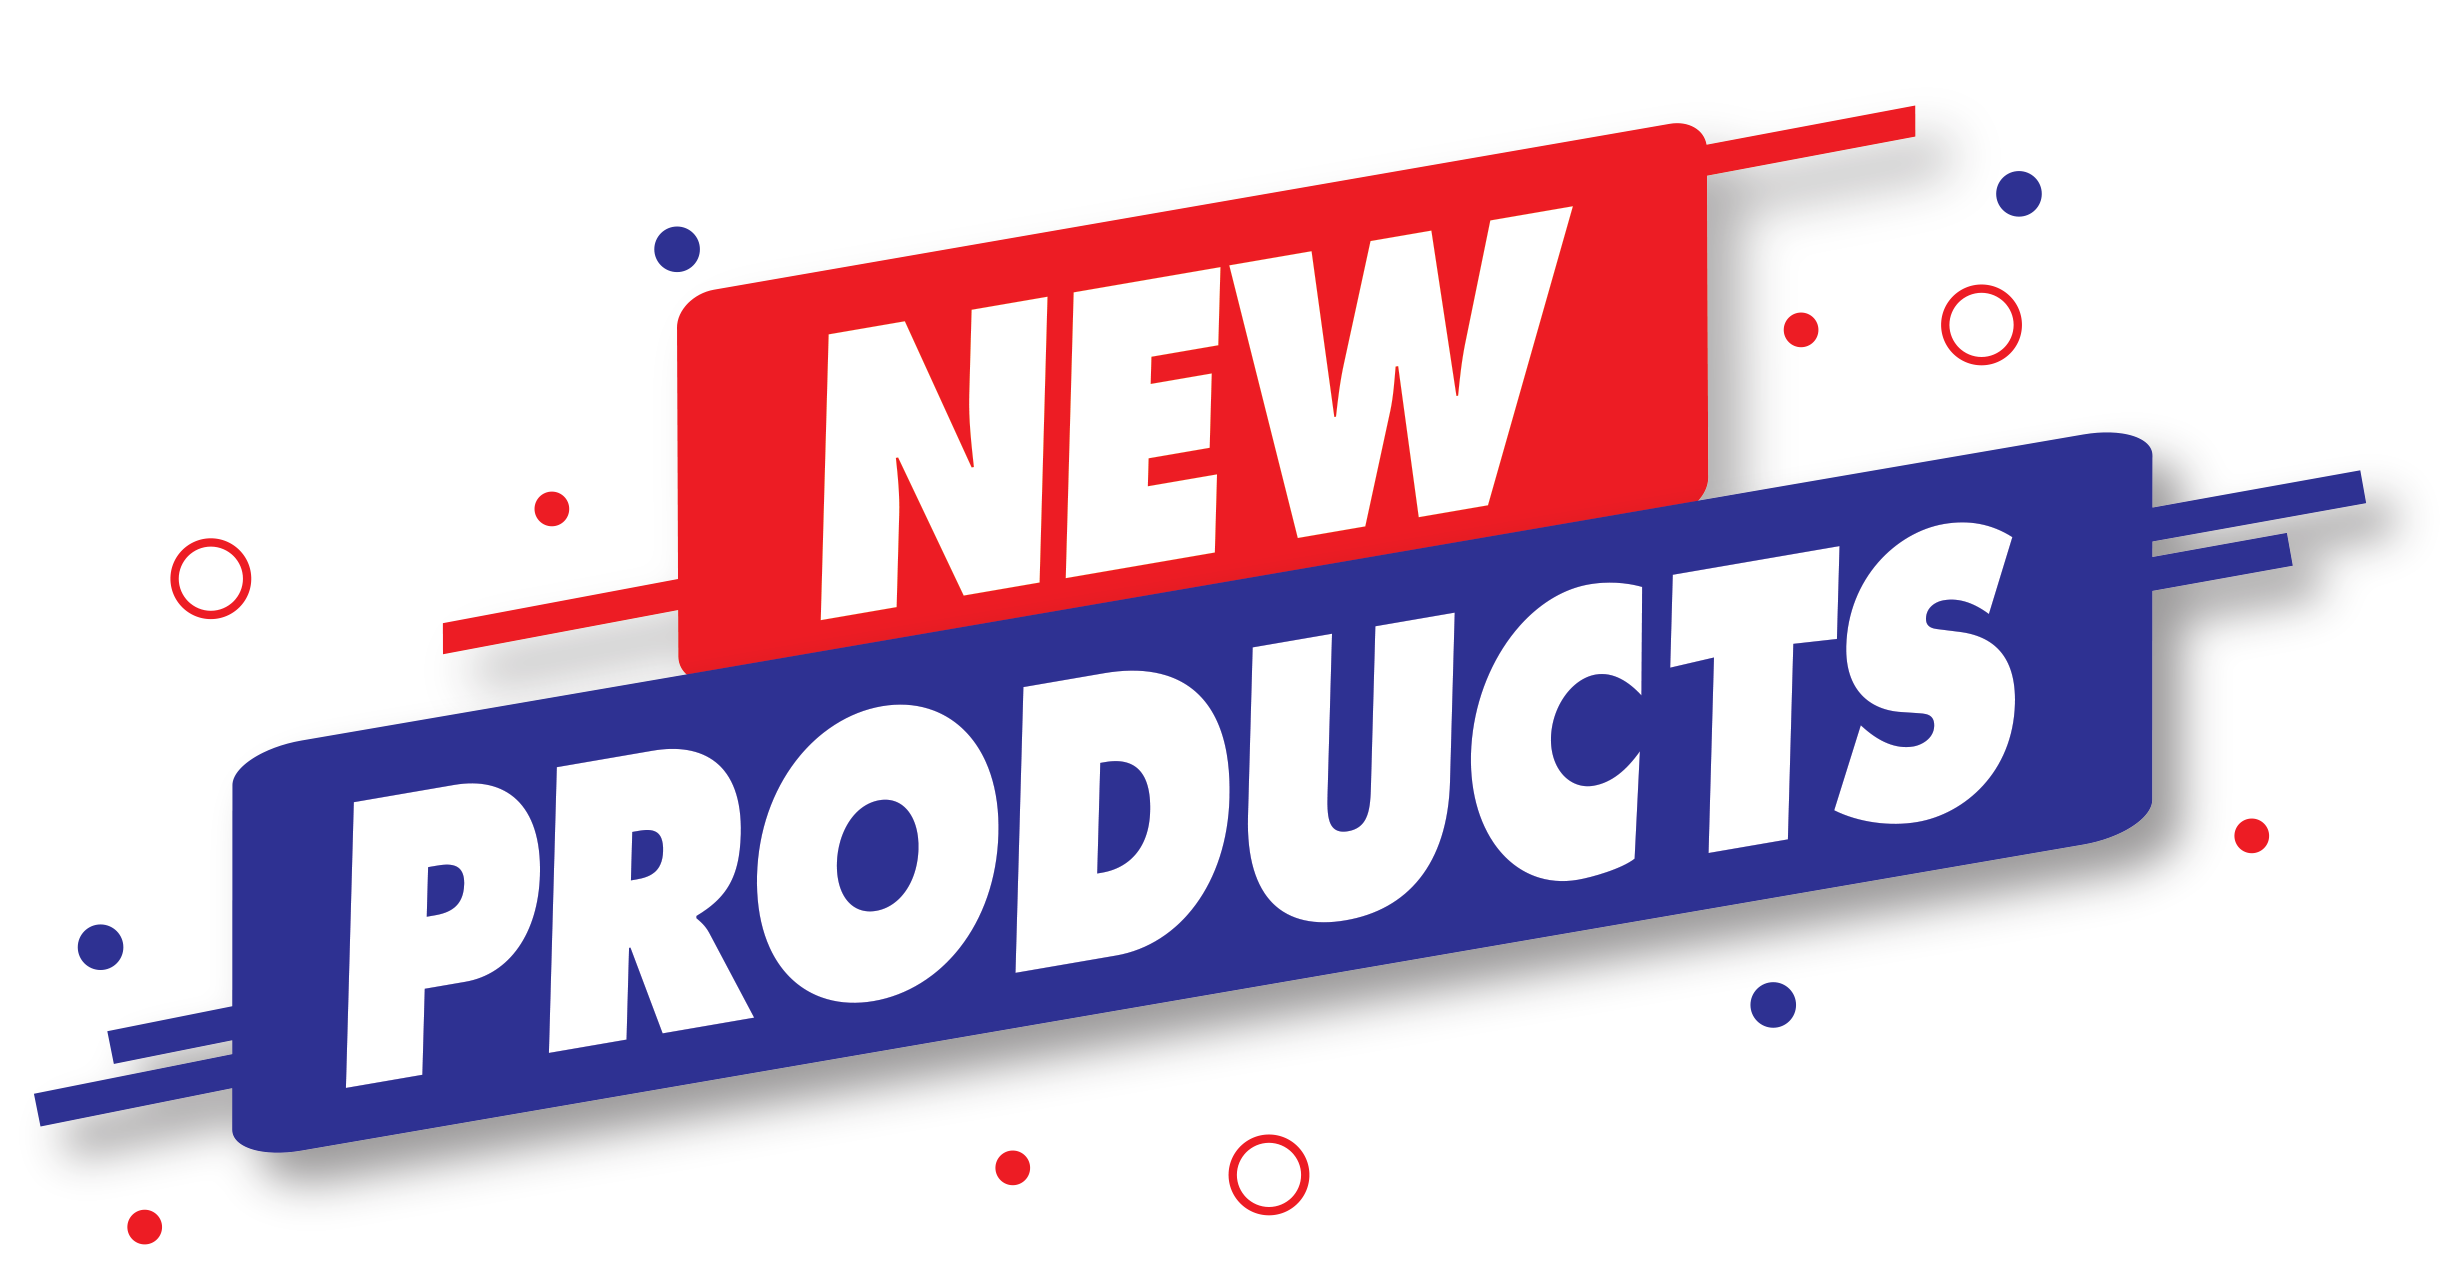 New products